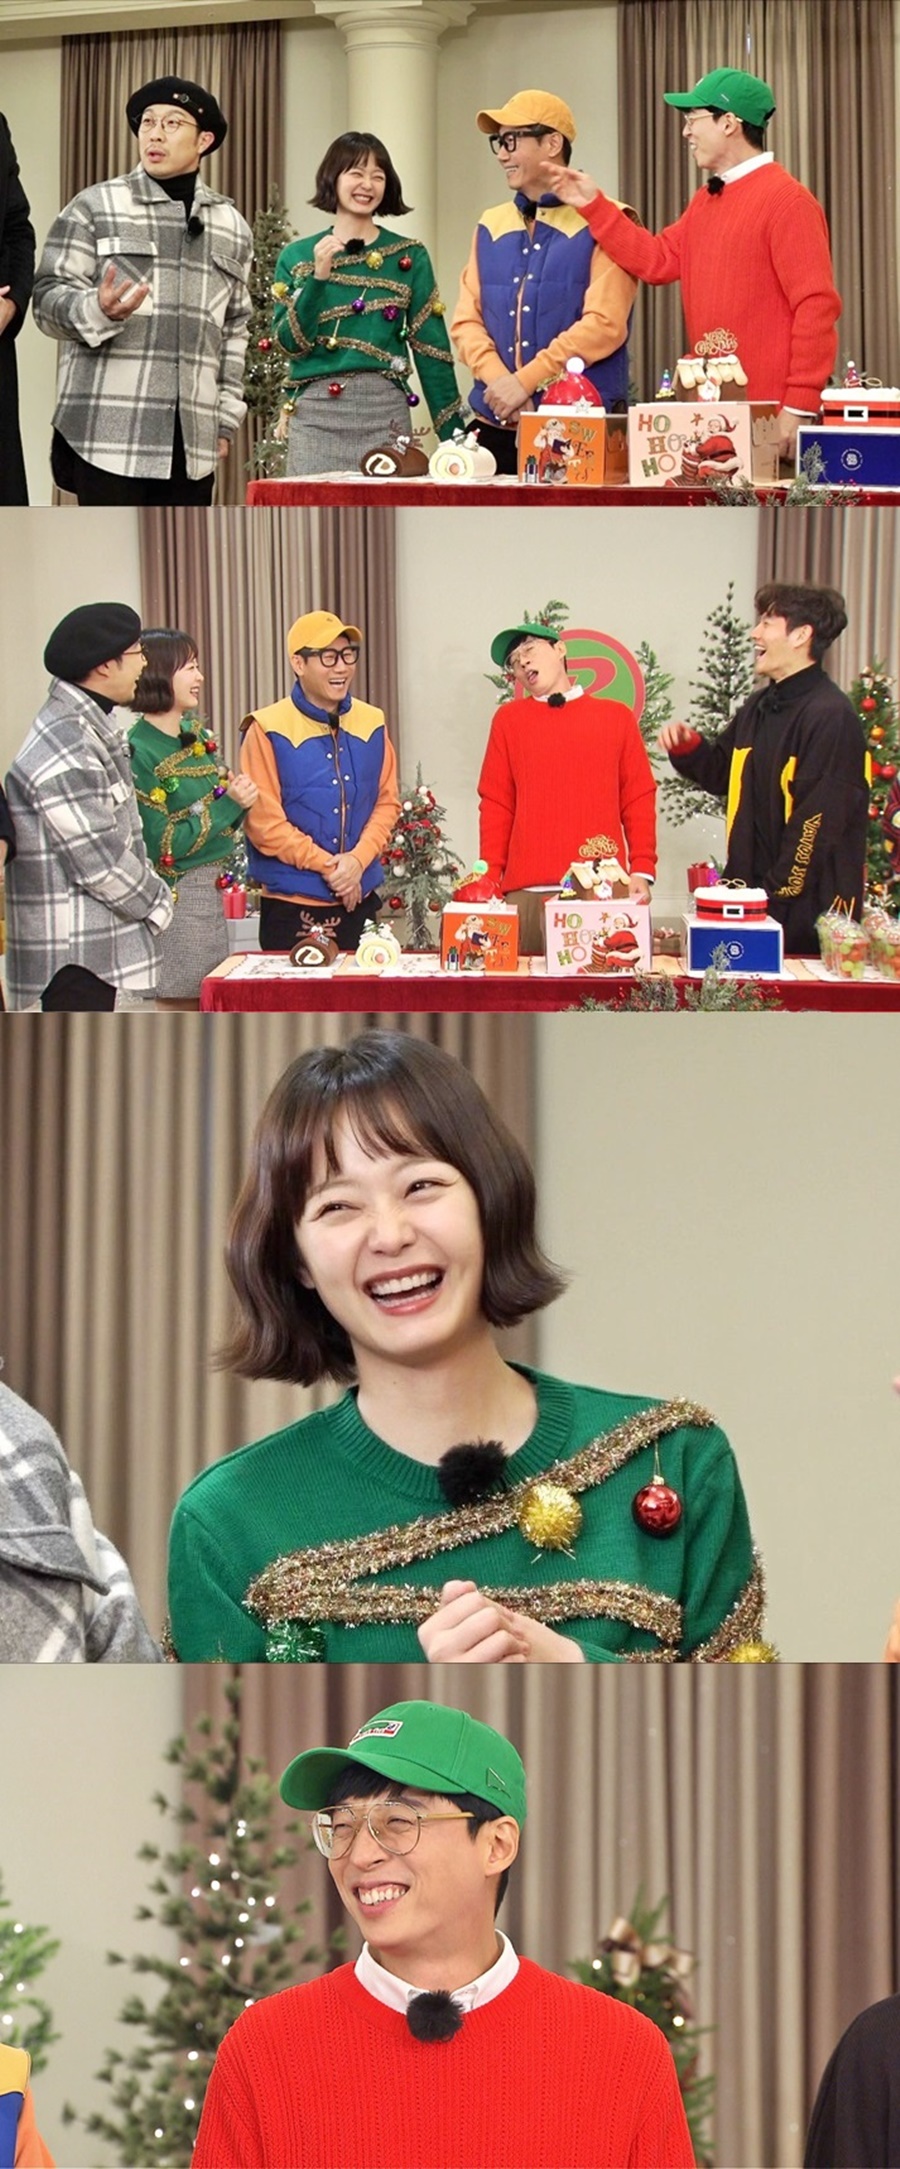 Running Man Yoo Jae-Suk Disclosures Jeon So-mins humiliationThe SBS entertainment program Running Man, which is broadcasted on the 23rd, is decorated with a Christmas special.On the day, Jeon So-min appeared in a costume reminiscent of a tree; the Christmas atmosphere became even hotter with Jeon So-mins costume.At this time, Yoo Jae-Suk disclosure the humiliation of Jeon So-min.When I was waiting in the car before shooting, I tried to greet Jeon So-mins car and said hello, but Jeon So-min was sleeping with his mouth open.Yoo Jae-Suk, along with Disclosure, laughed with a real mimic of Jeon So-min sleeping with his mouth open.Jeon So-min said he was tired of the busy schedule but eventually surrendered to the expression description of Yoo Jae-Suk.SBS Running Man is broadcast every Sunday at 4:50 pm.